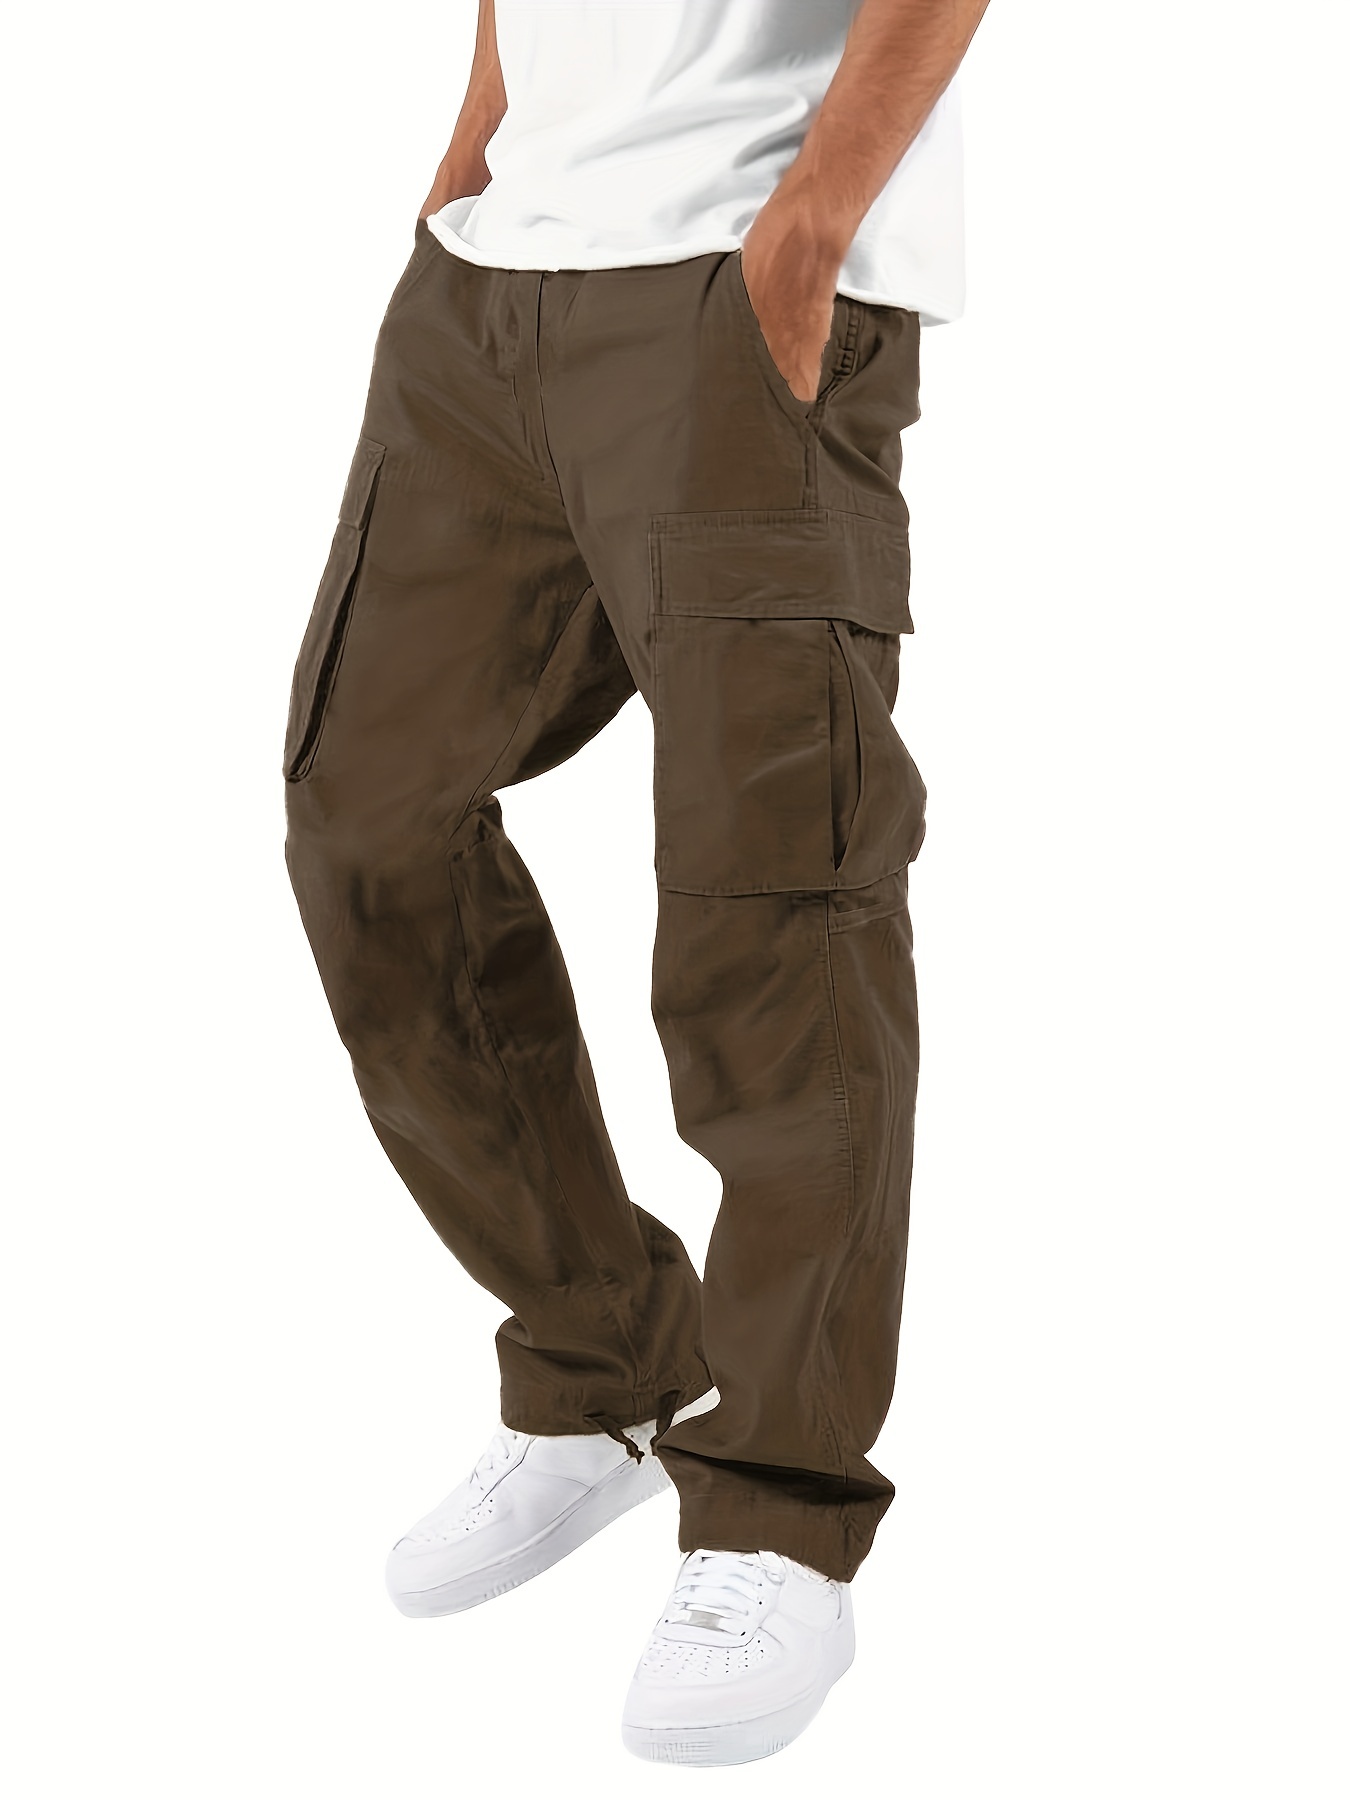 Buy zeetoo Mens Relaxed-Fit Cargo Pants Multi Pocket Military Camo